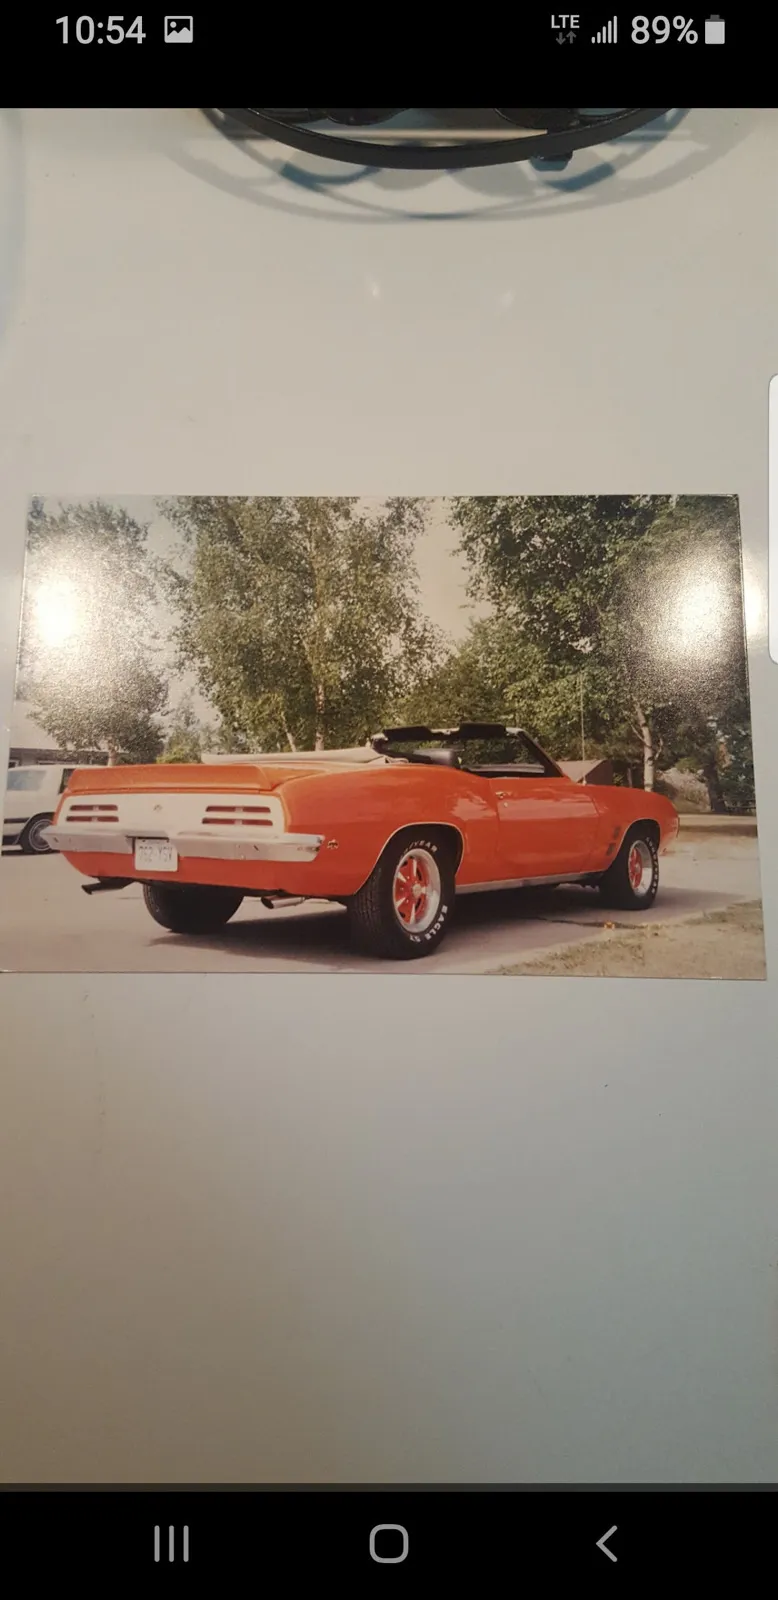 WANTED LOCATION OF MY OLD 1969 FIREBIRD!!